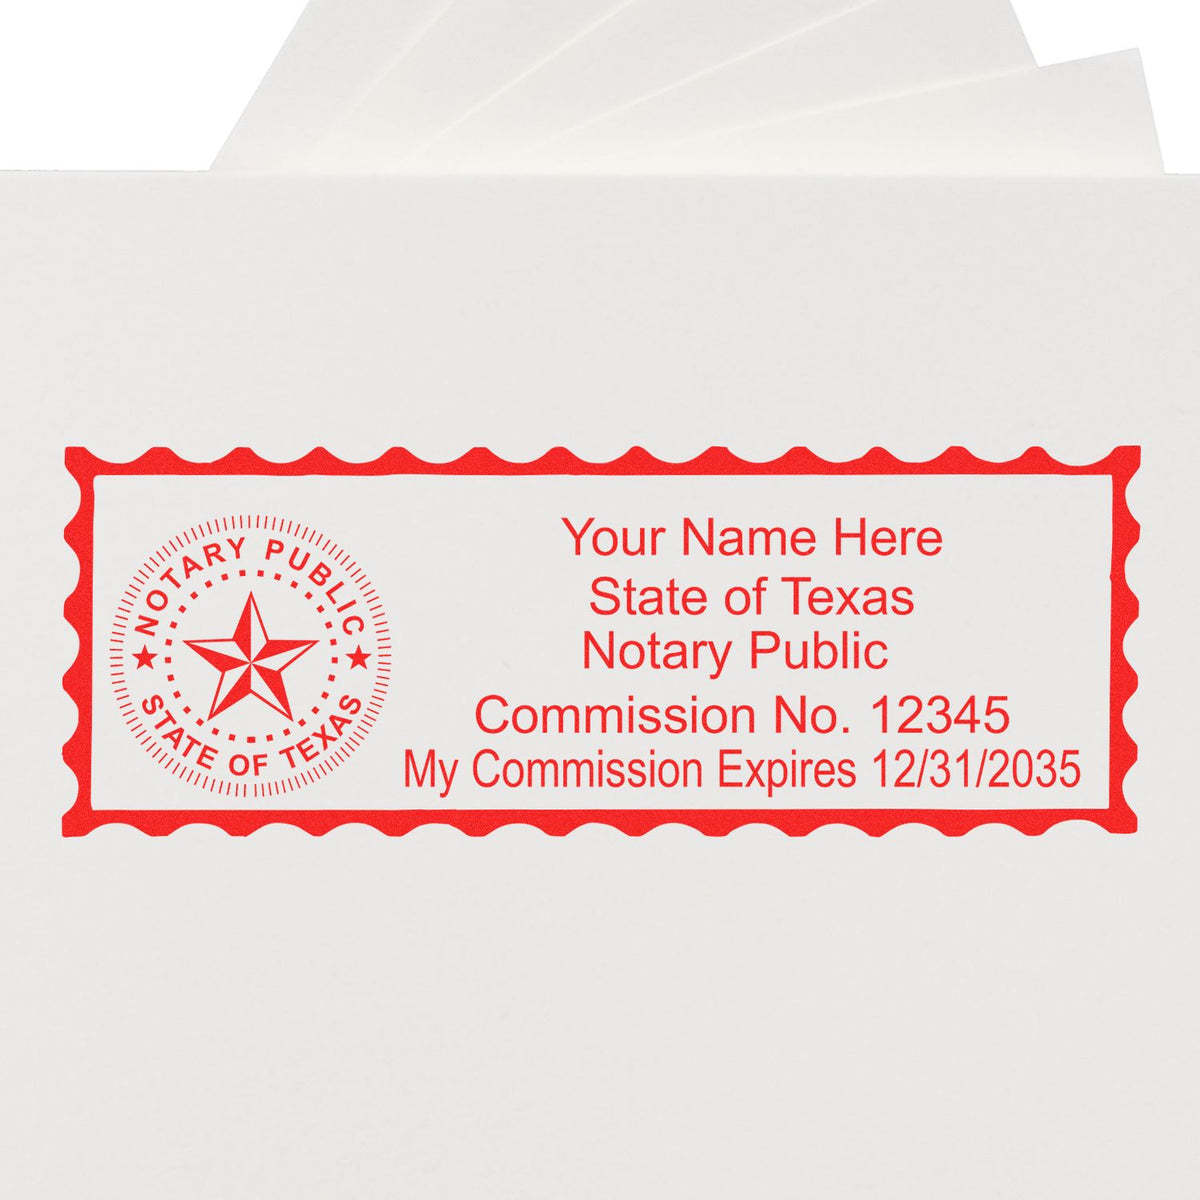 The Heavy-Duty Texas Rectangular Notary Stamp stamp impression comes to life with a crisp, detailed photo on paper - showcasing true professional quality.